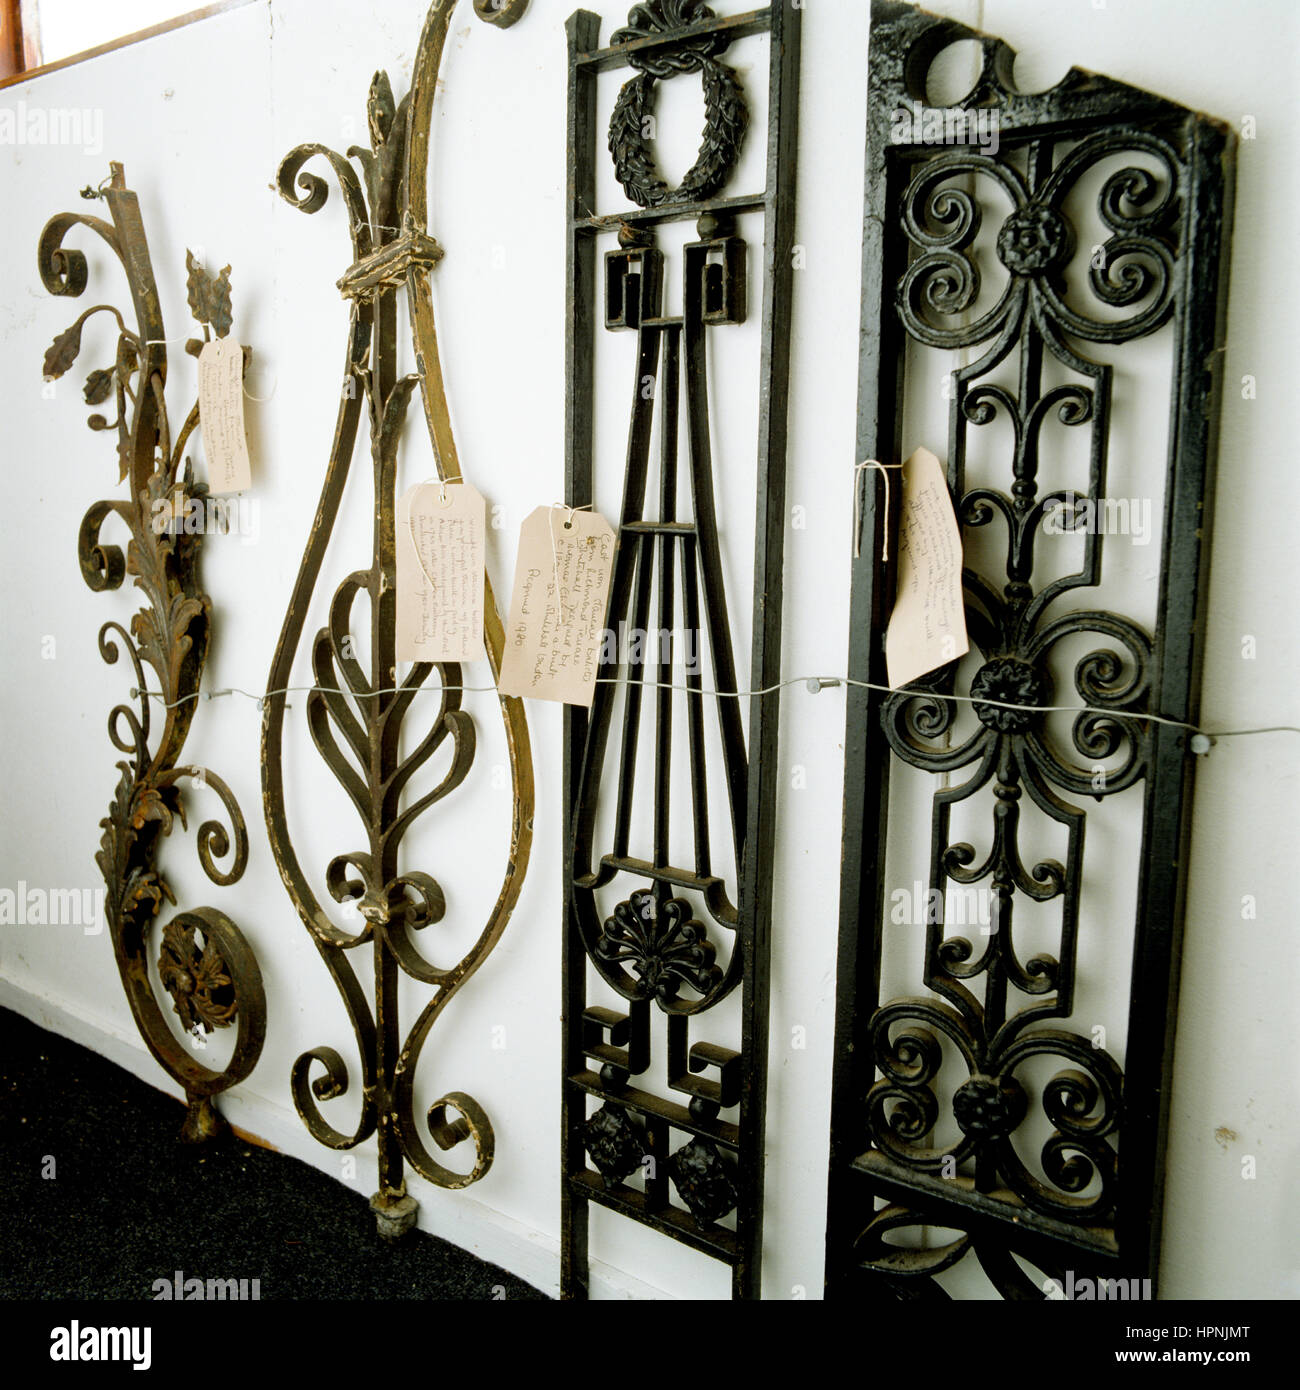 A display of wrought iron grates with labels. Stock Photo